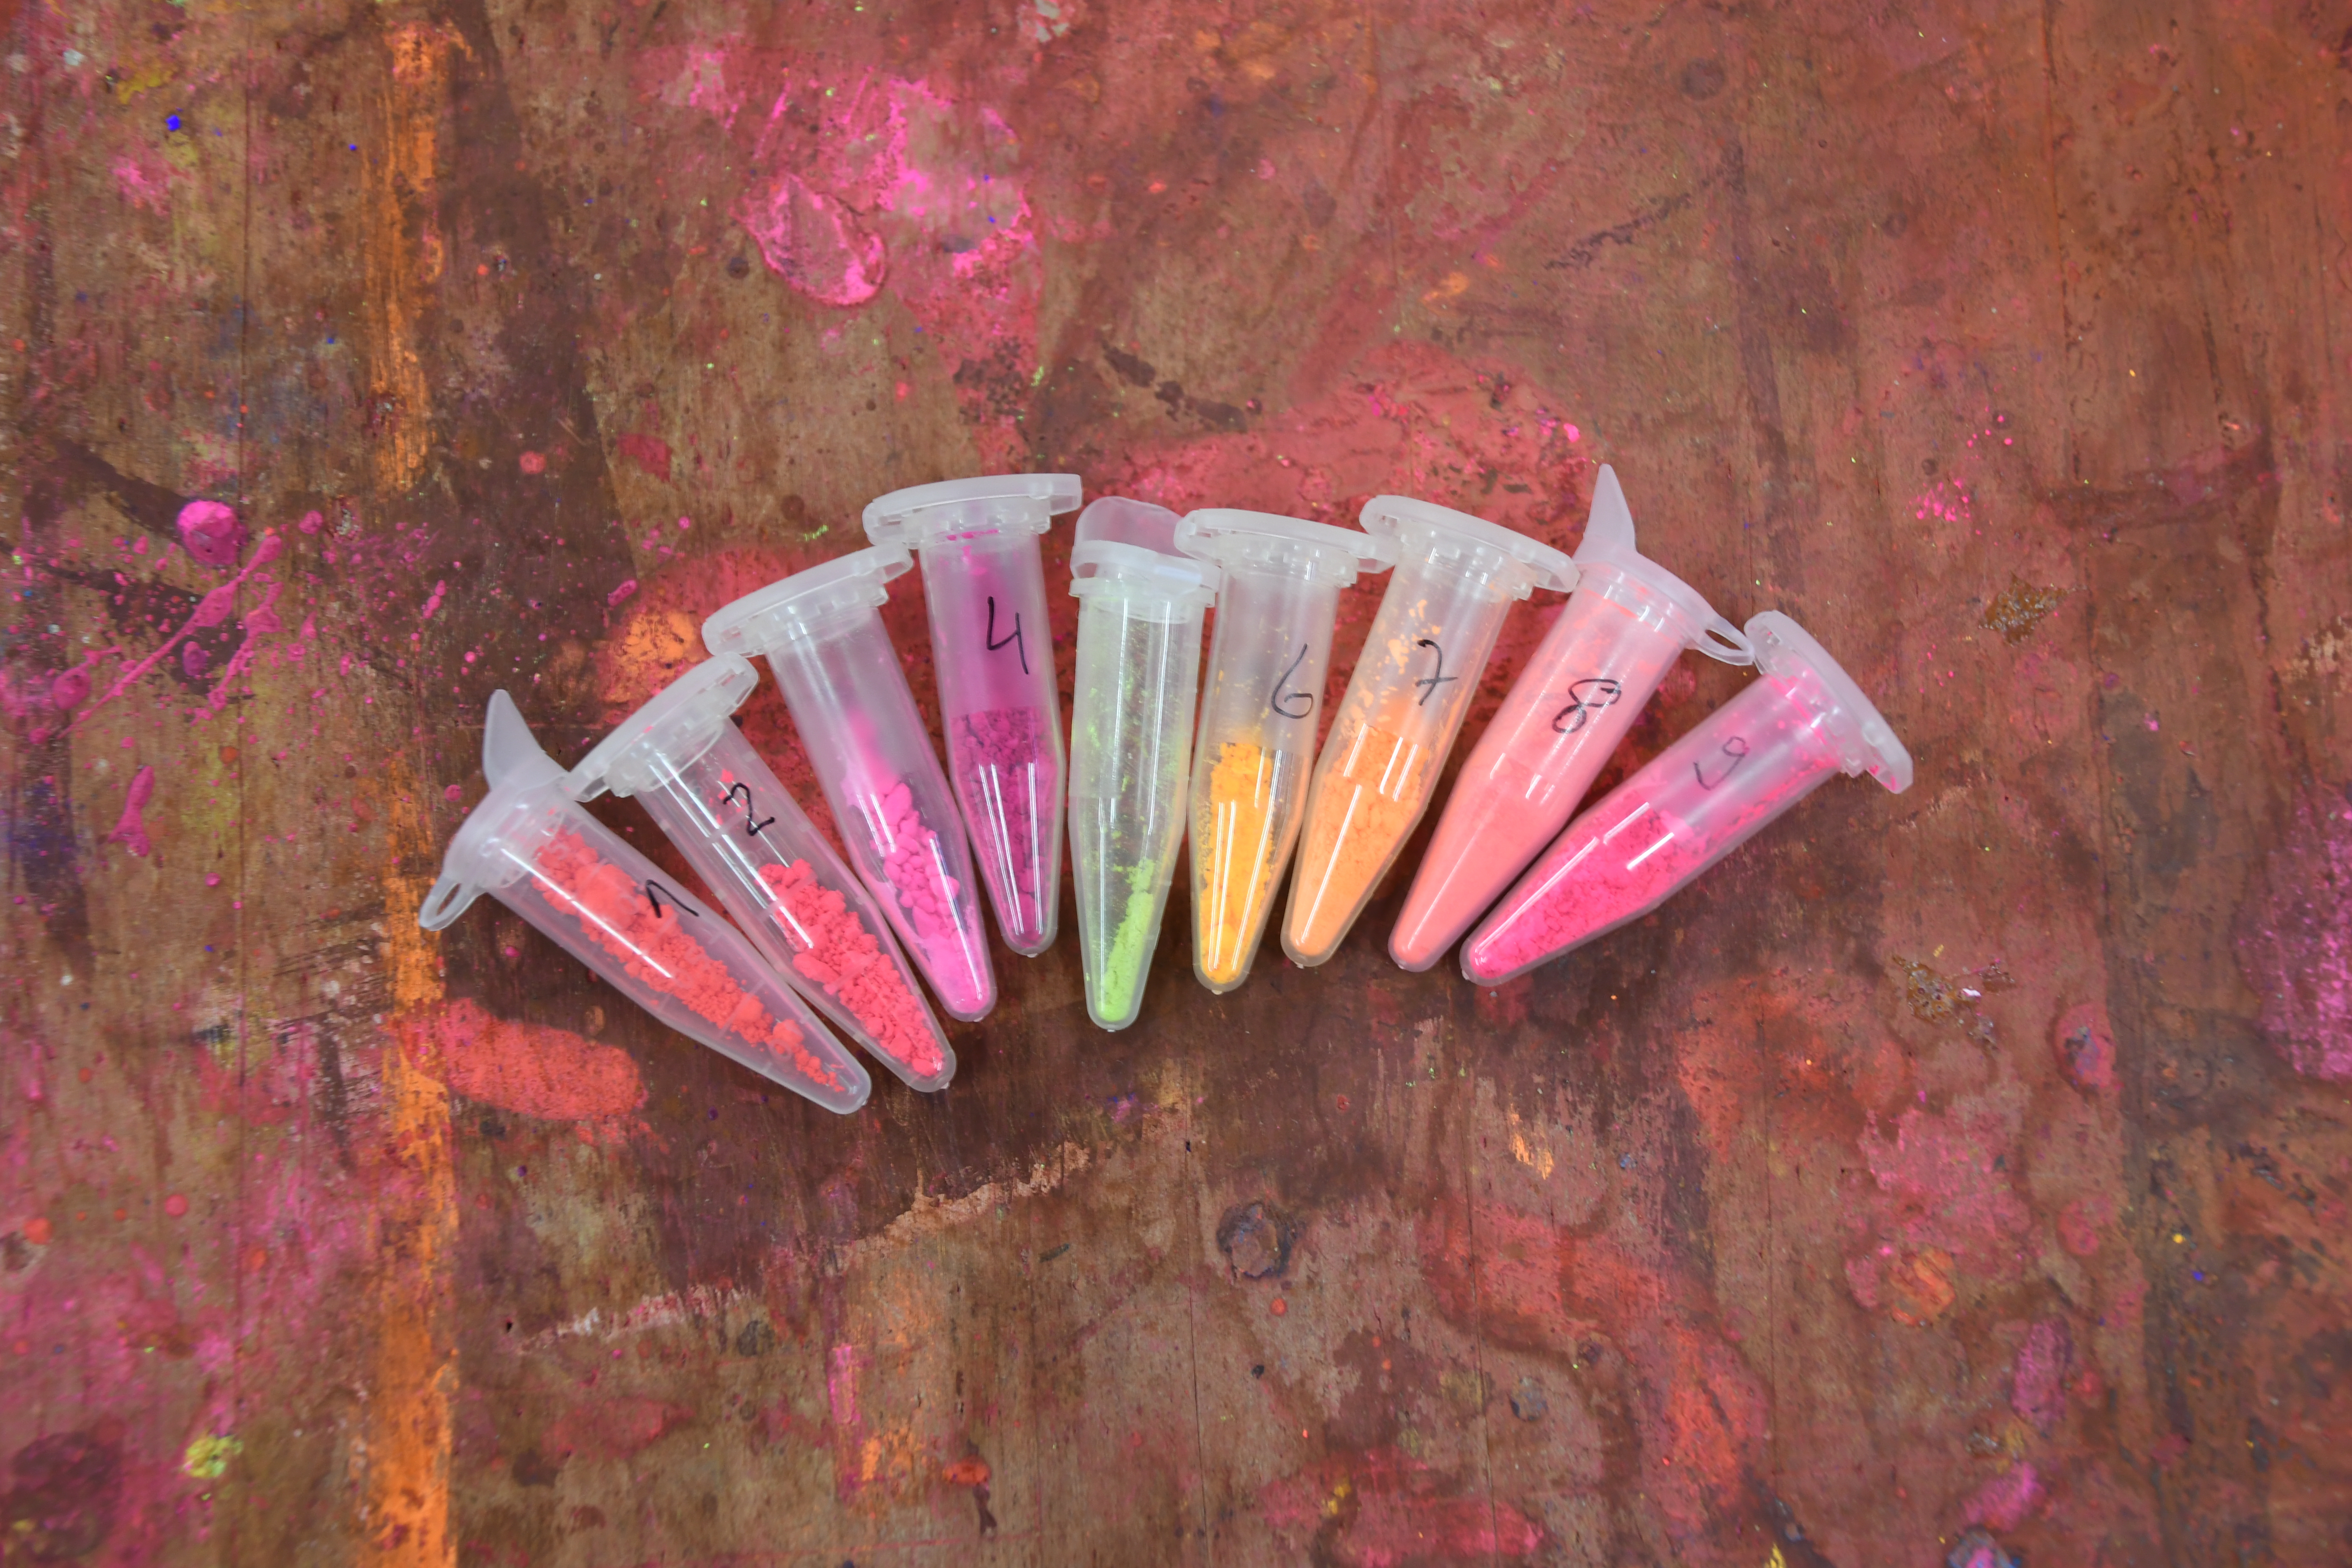 Samples of fluorescent pigments from the Geiger archive